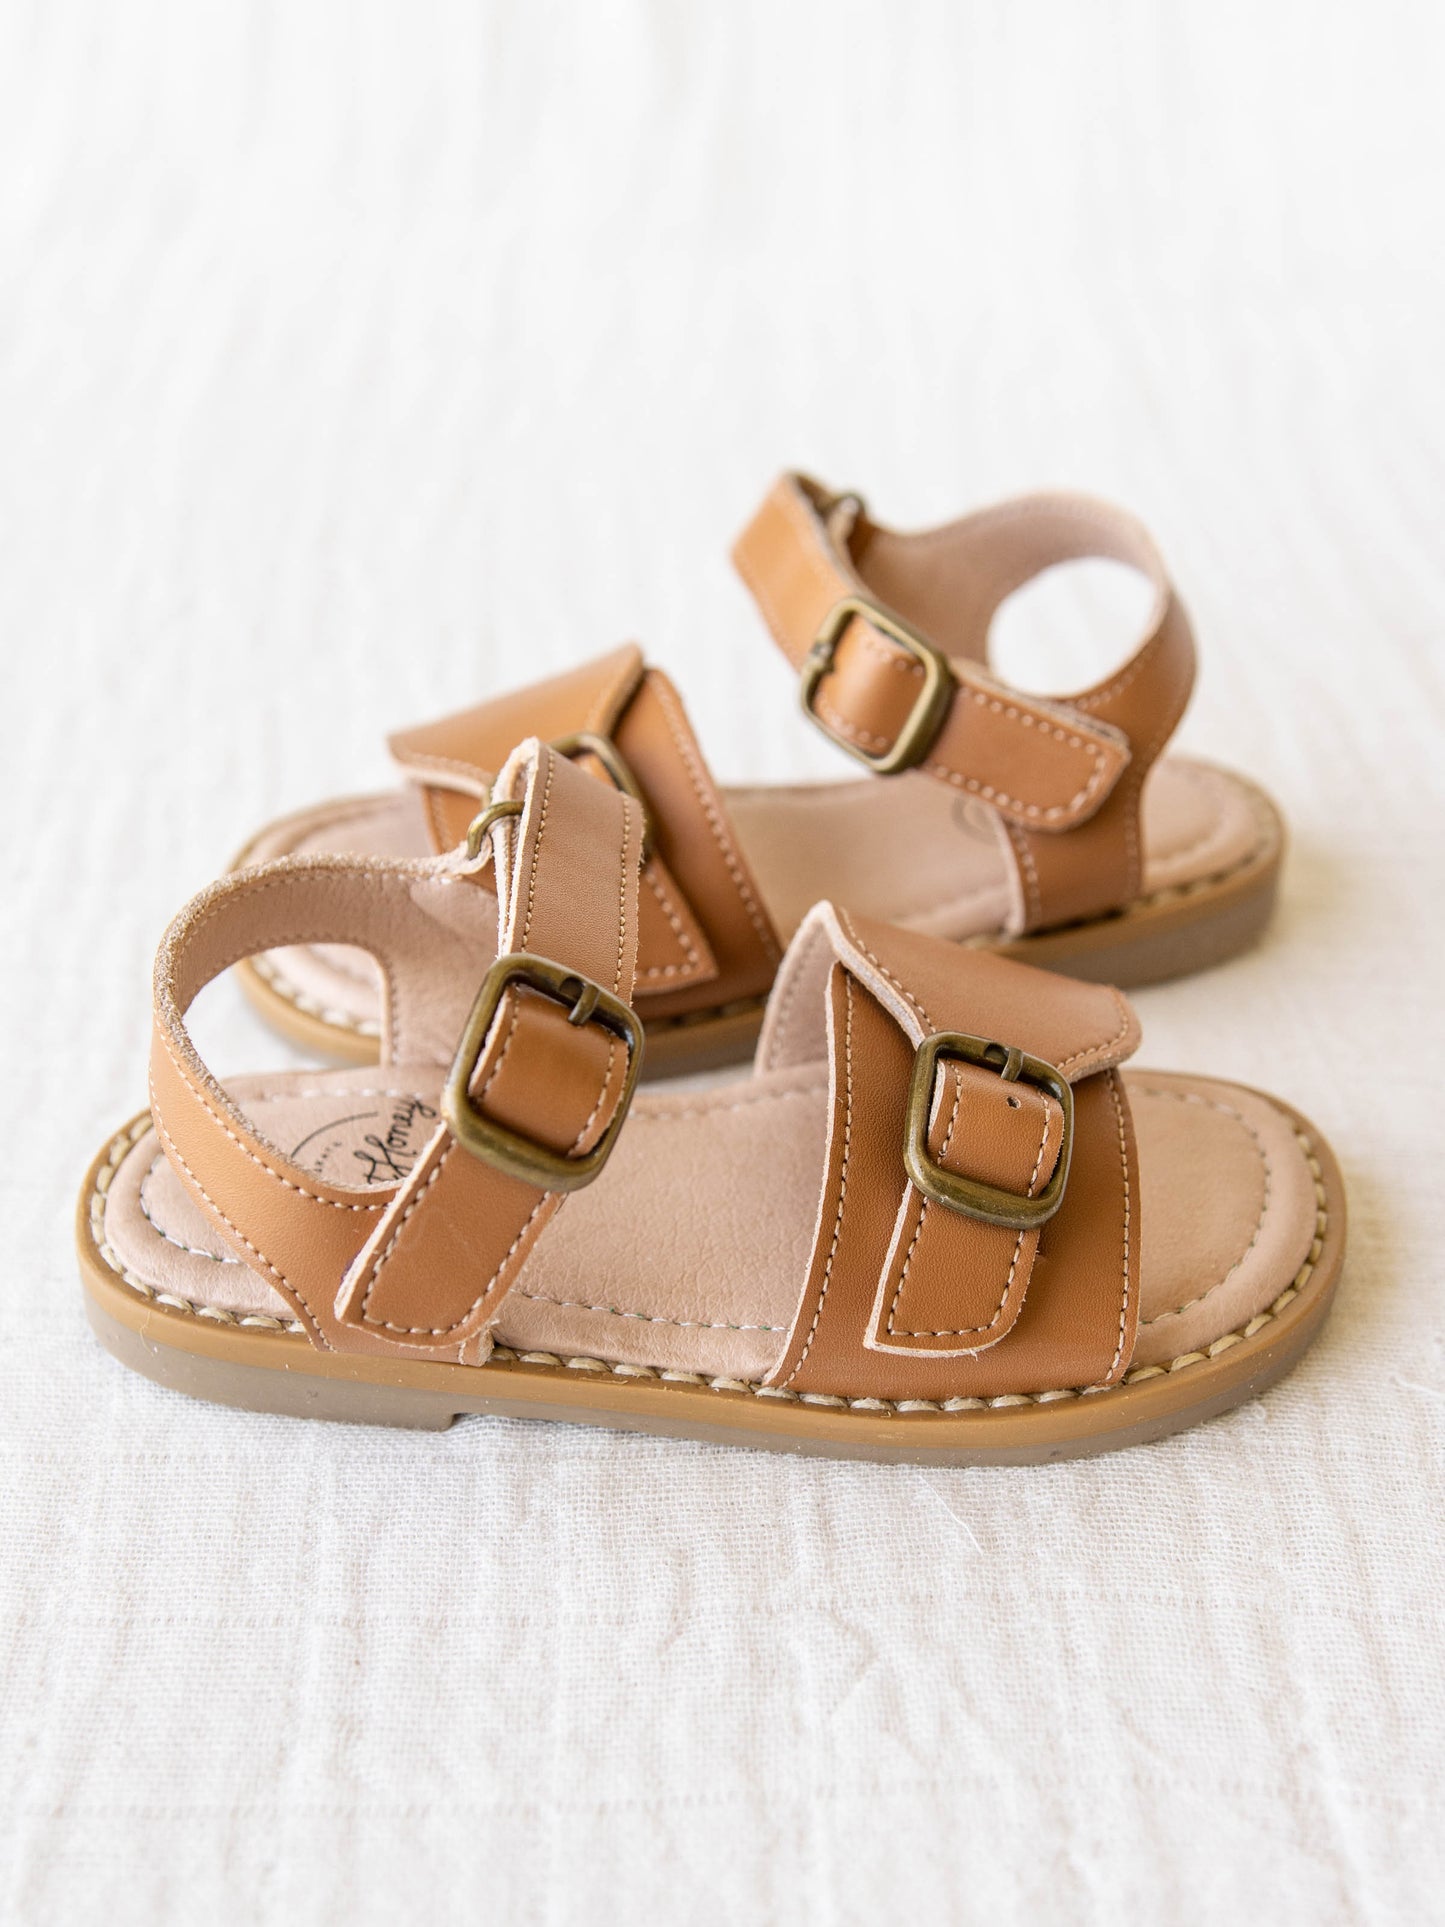 This pair of brown colored manmade leather rubber soled sandals with two adjustable metal buckles are the perfect finish to an outfit. 